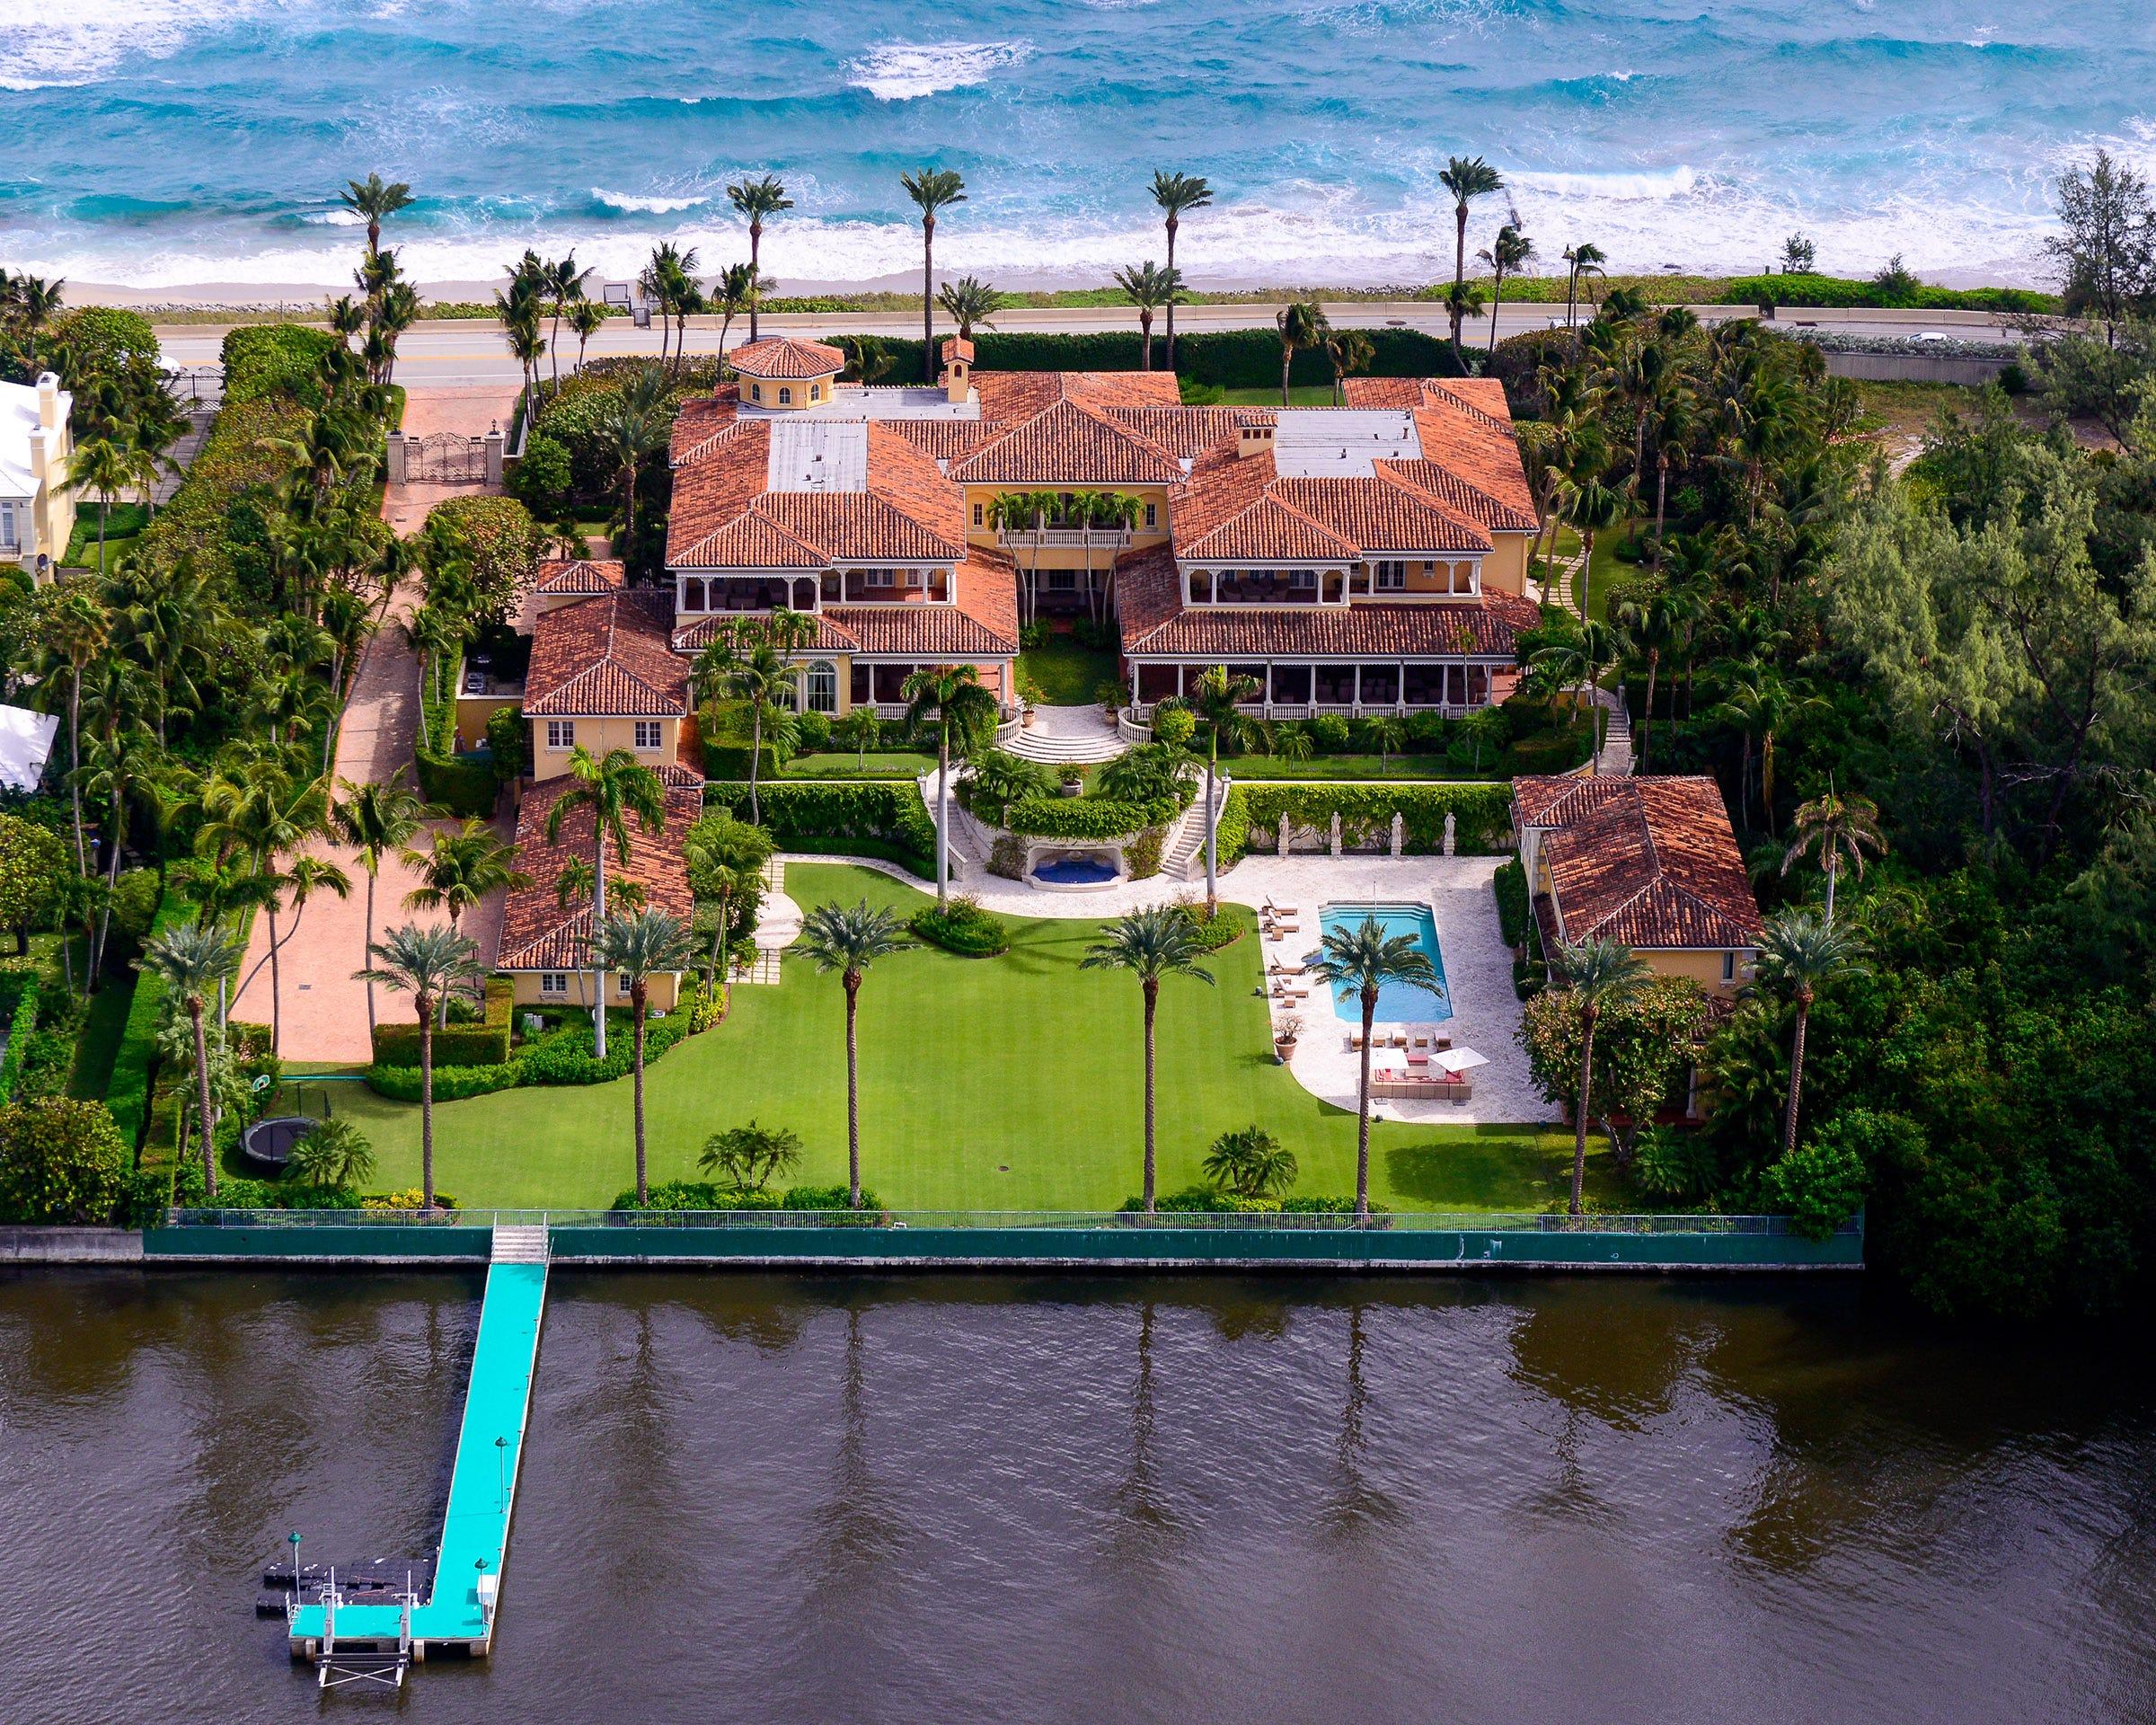 Las Vegas casino-and-resort mogul Steve Wynn has been linked to the purchase, recorded at $43 million, this week of an ocean-to-lake estate at 1960 S. Ocean Blvd. in Palm Beach. The lot measures 2.25 acres. [Photo by Andy Frame, courtesy Sotheby’s International Realty]